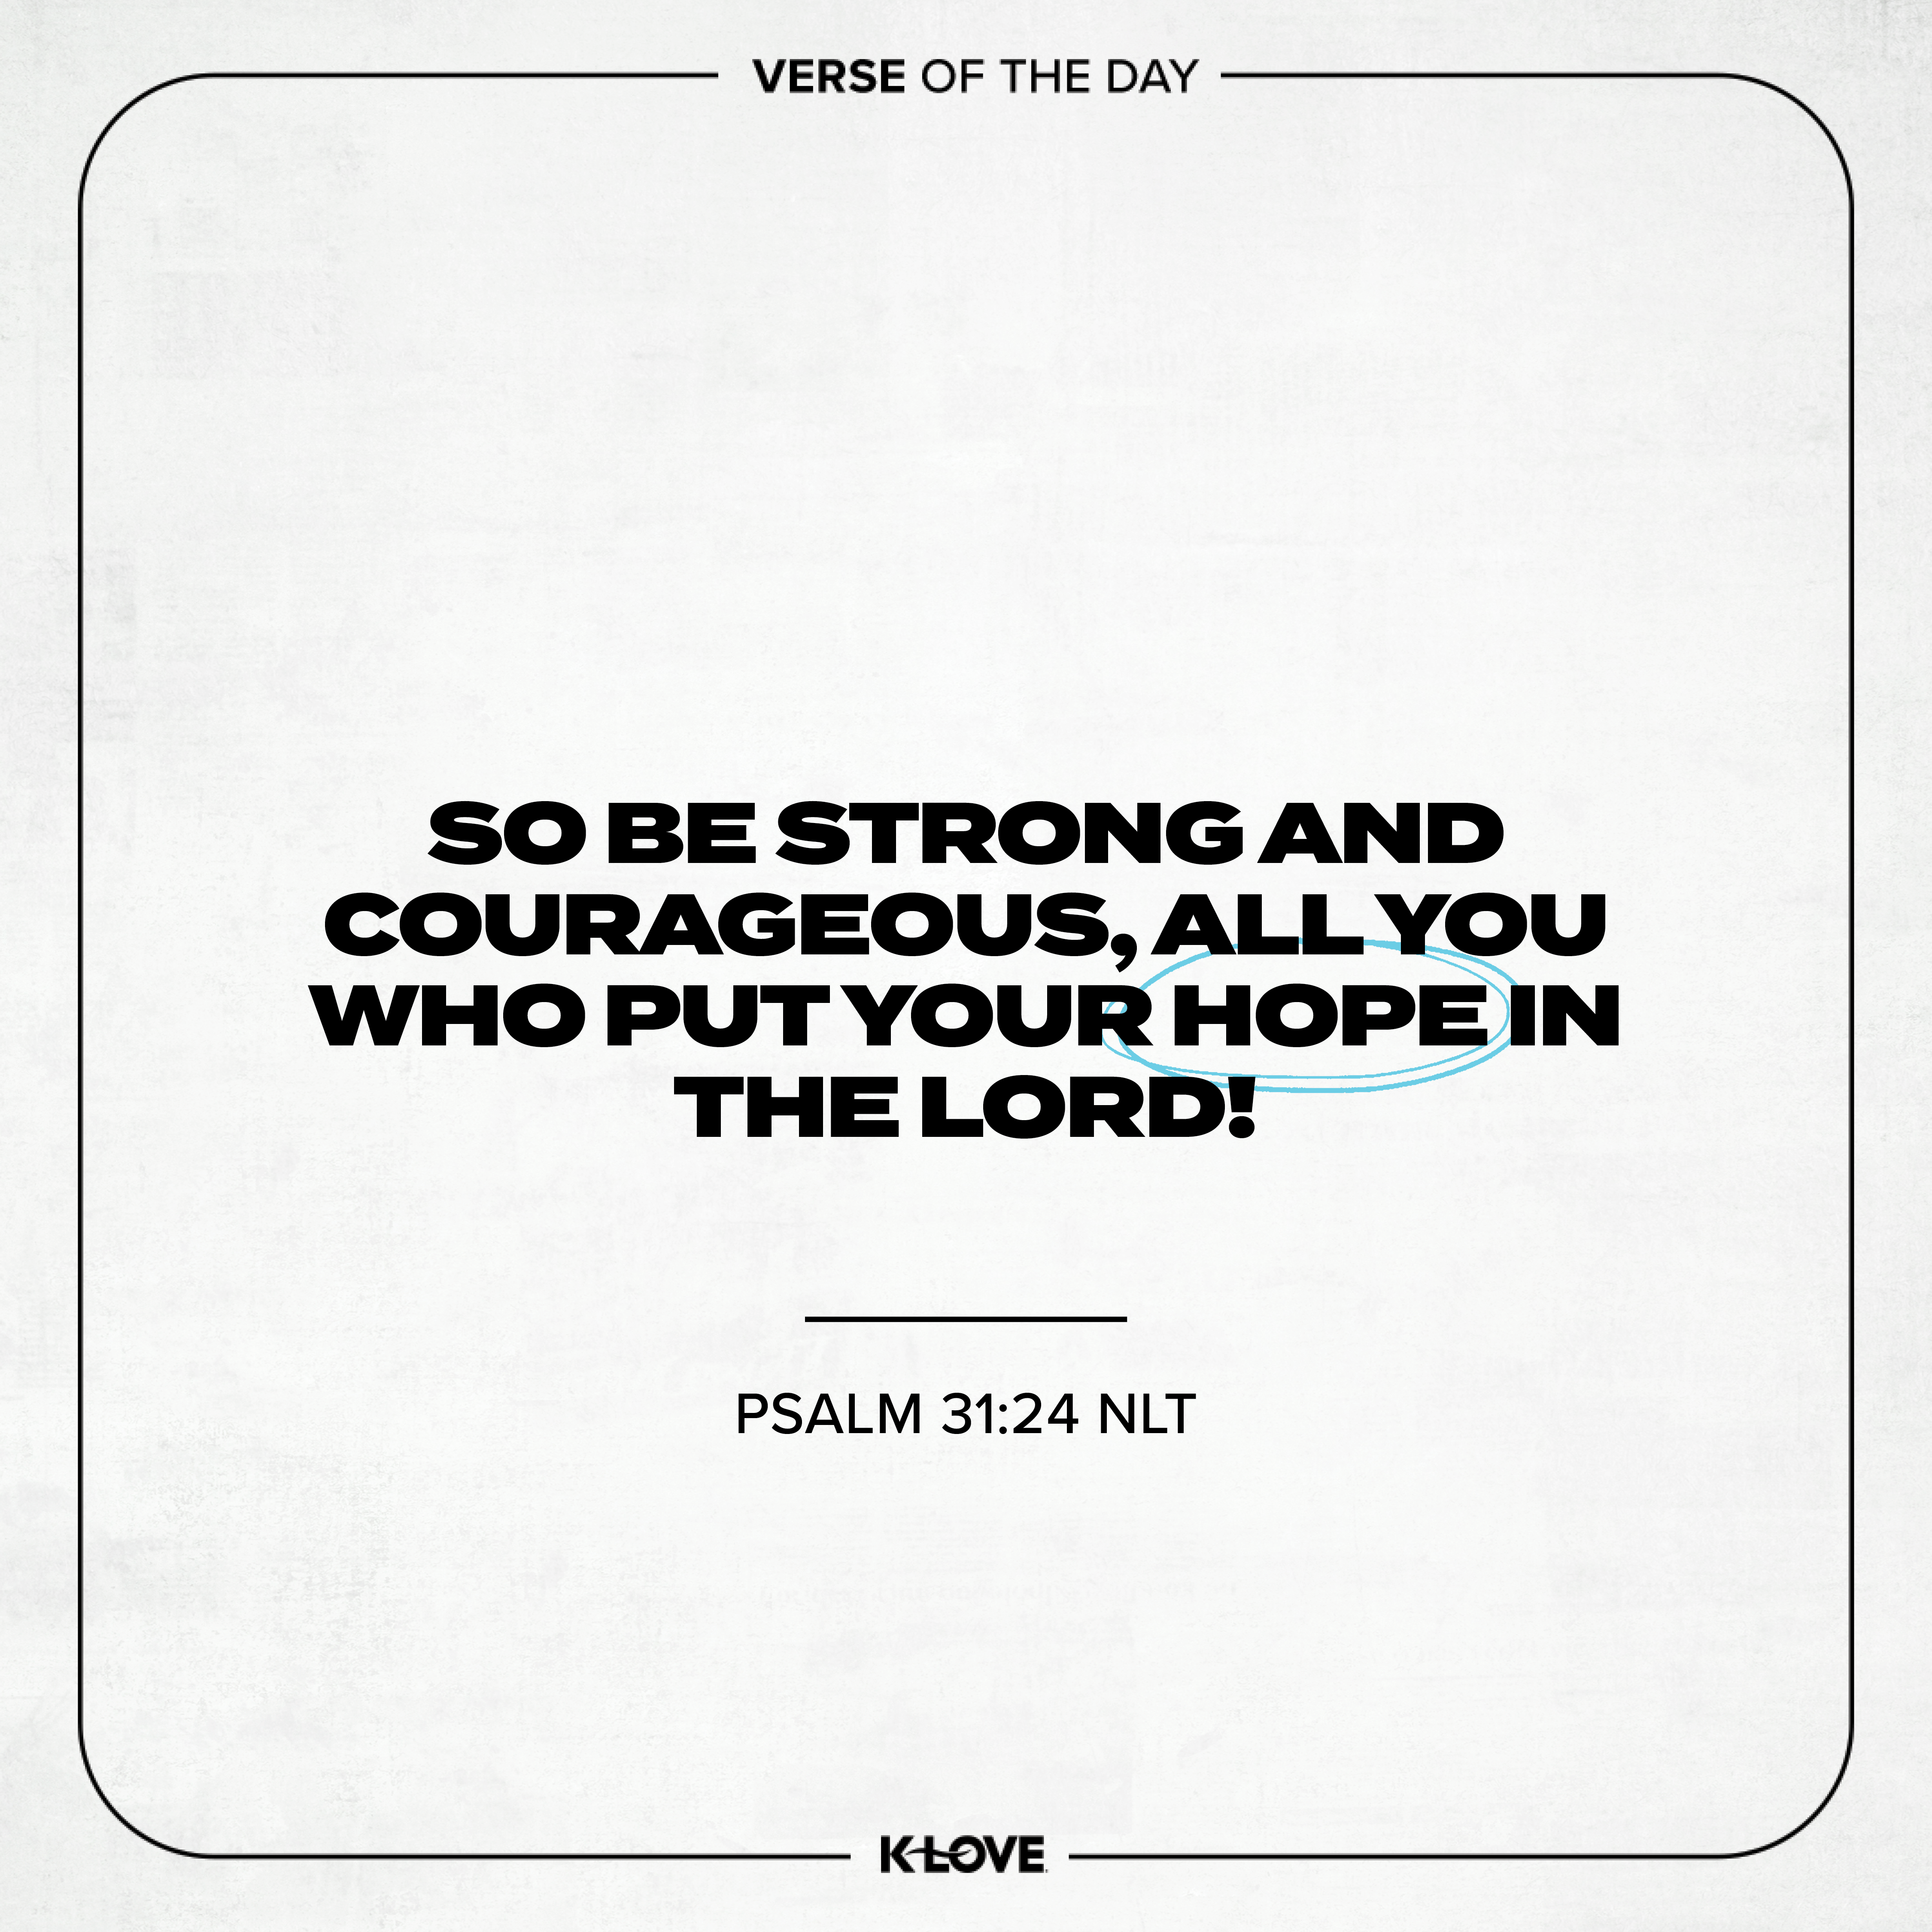 So be strong and courageous, all you who put your hope in the LORD!